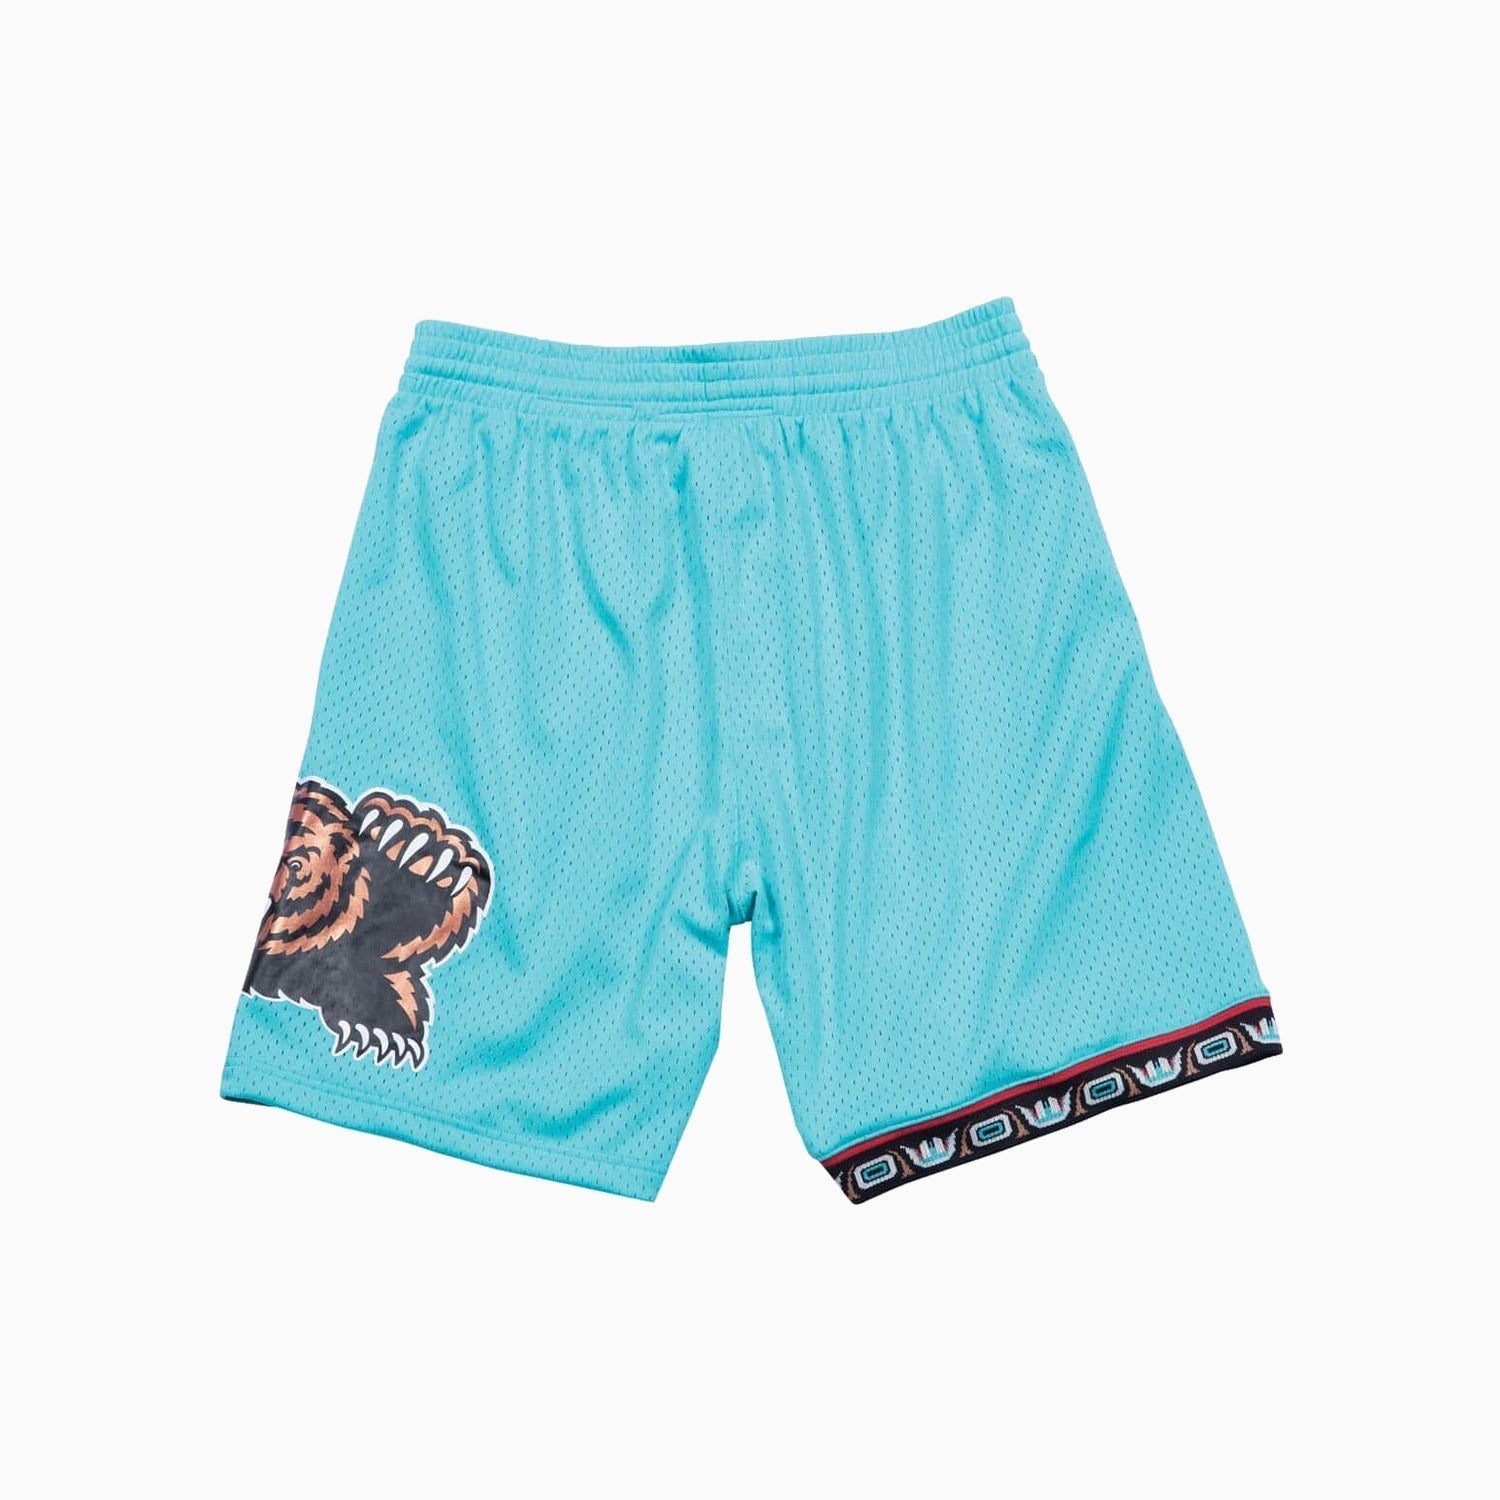 mitchell-and-ness-swingman-vancouver-grizzlies-road-nba-1996-97-shorts-smshgs18259-vgrteal96